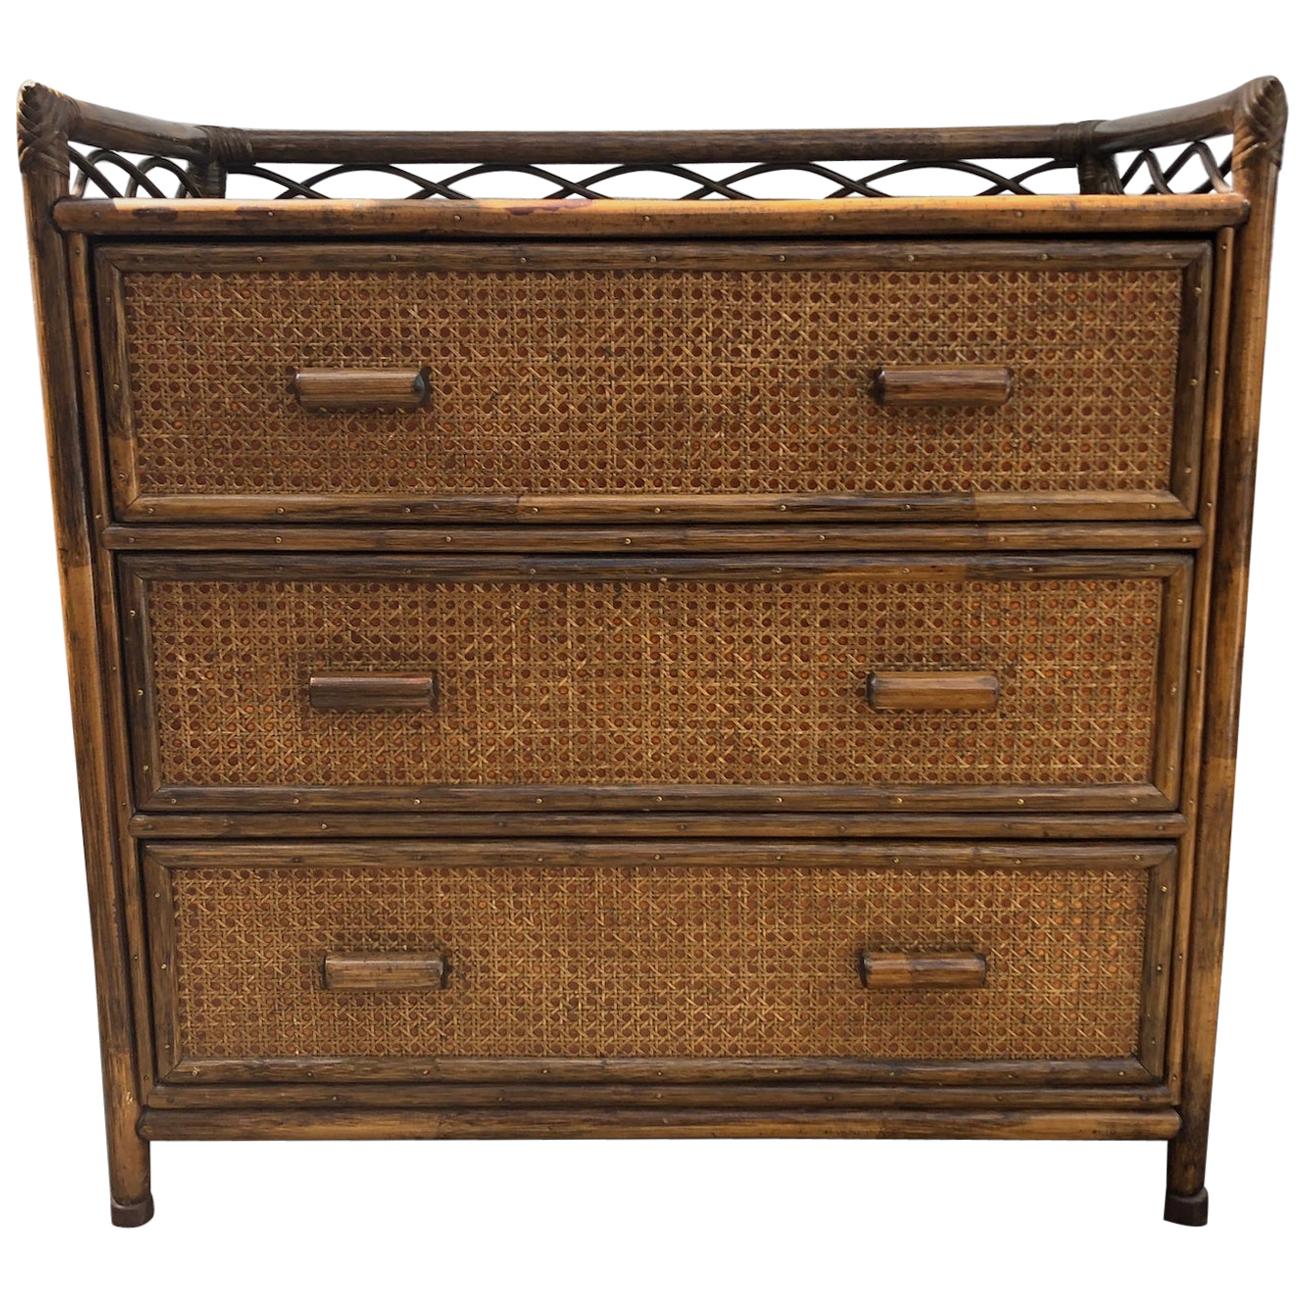 Midcentury Rattan / Cane Chest of Drawers by Angraves, England, 1970s